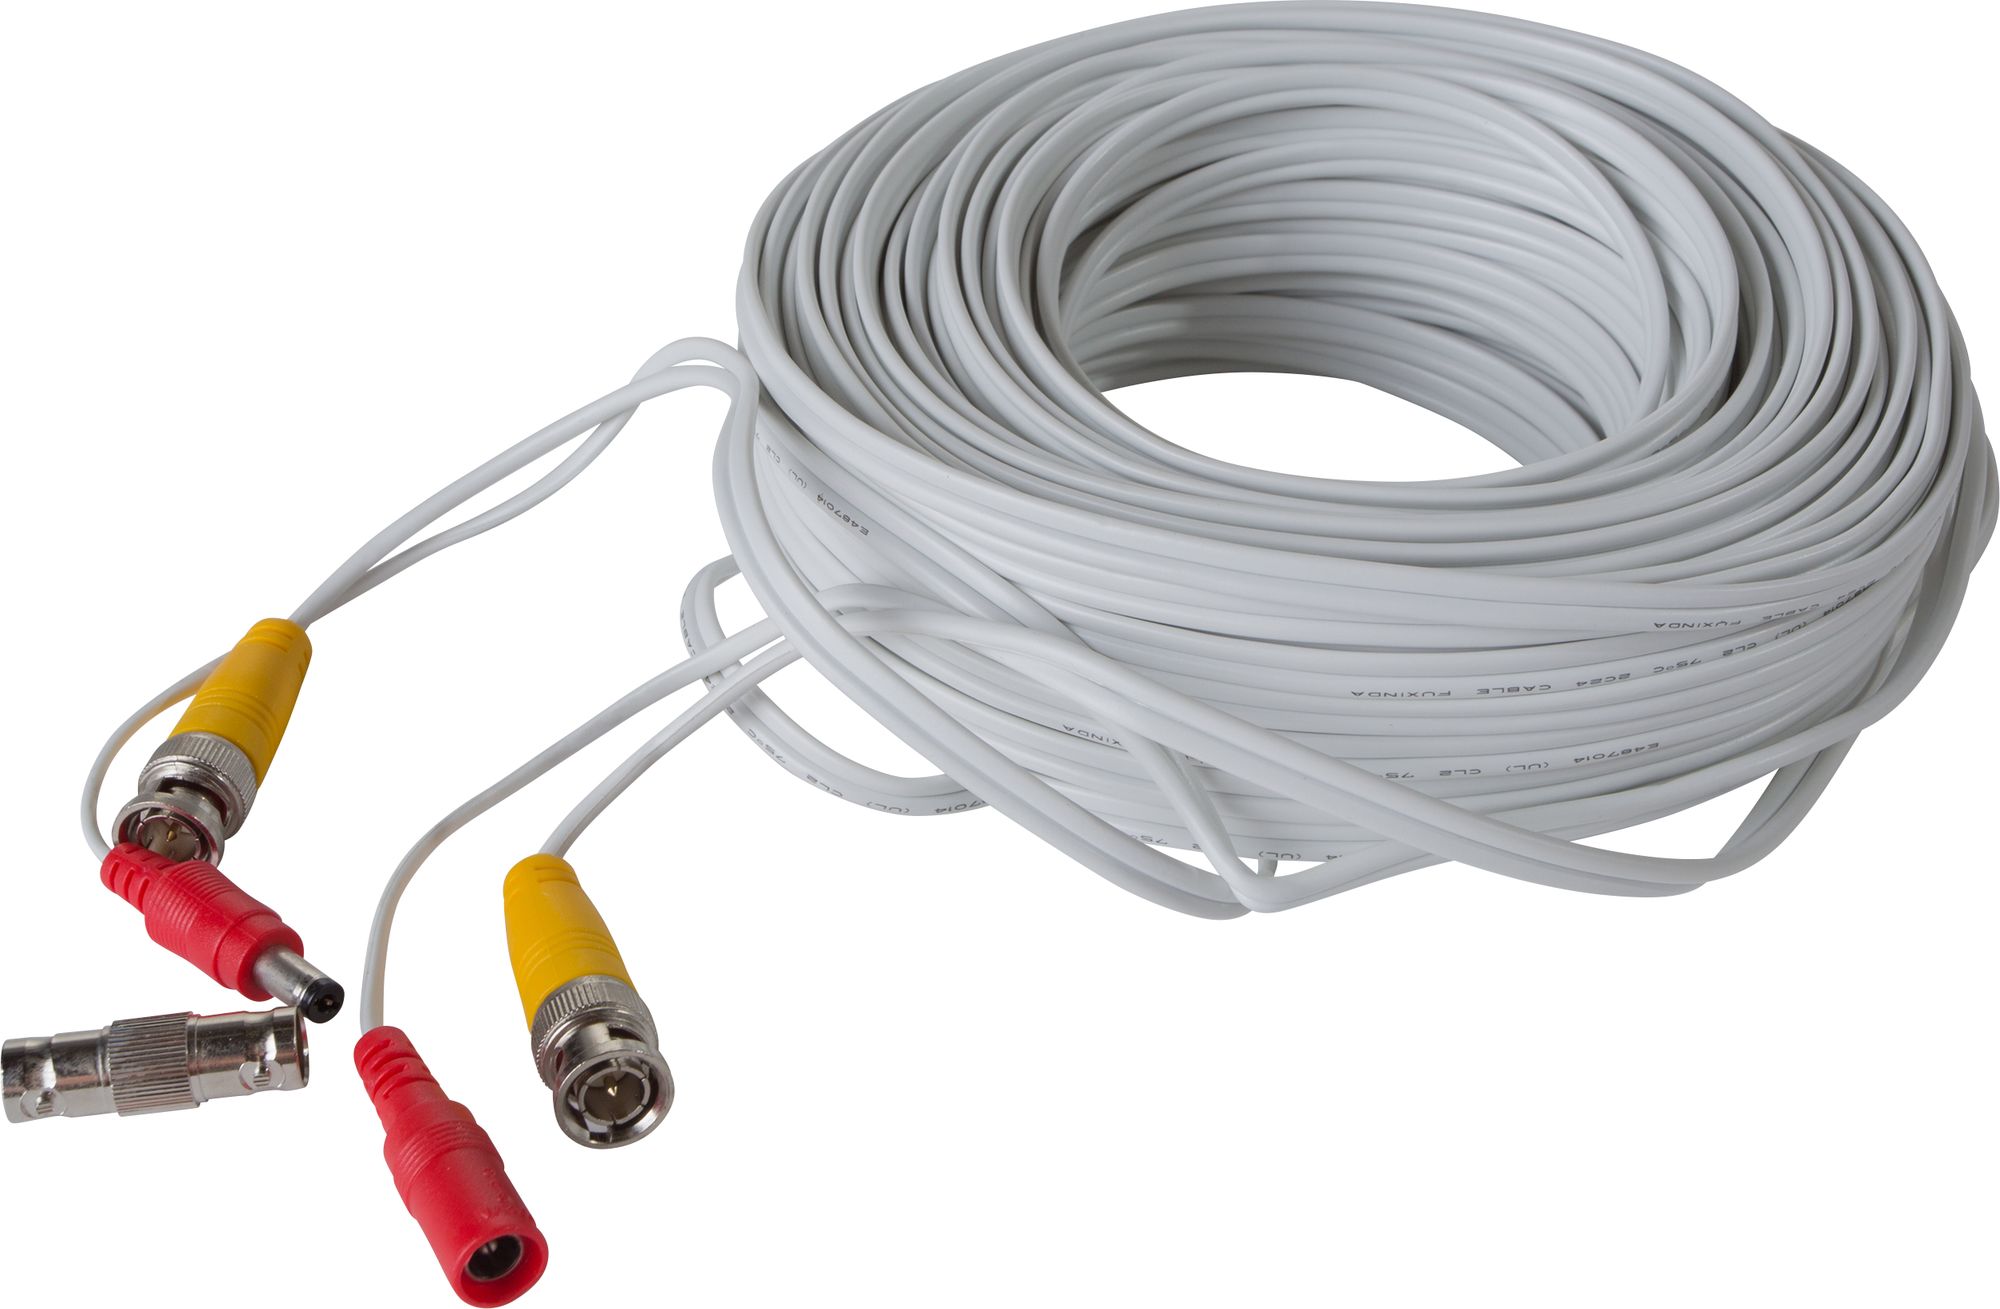 100ft BNC Video & Power Cable For Security Surveillance Cameras